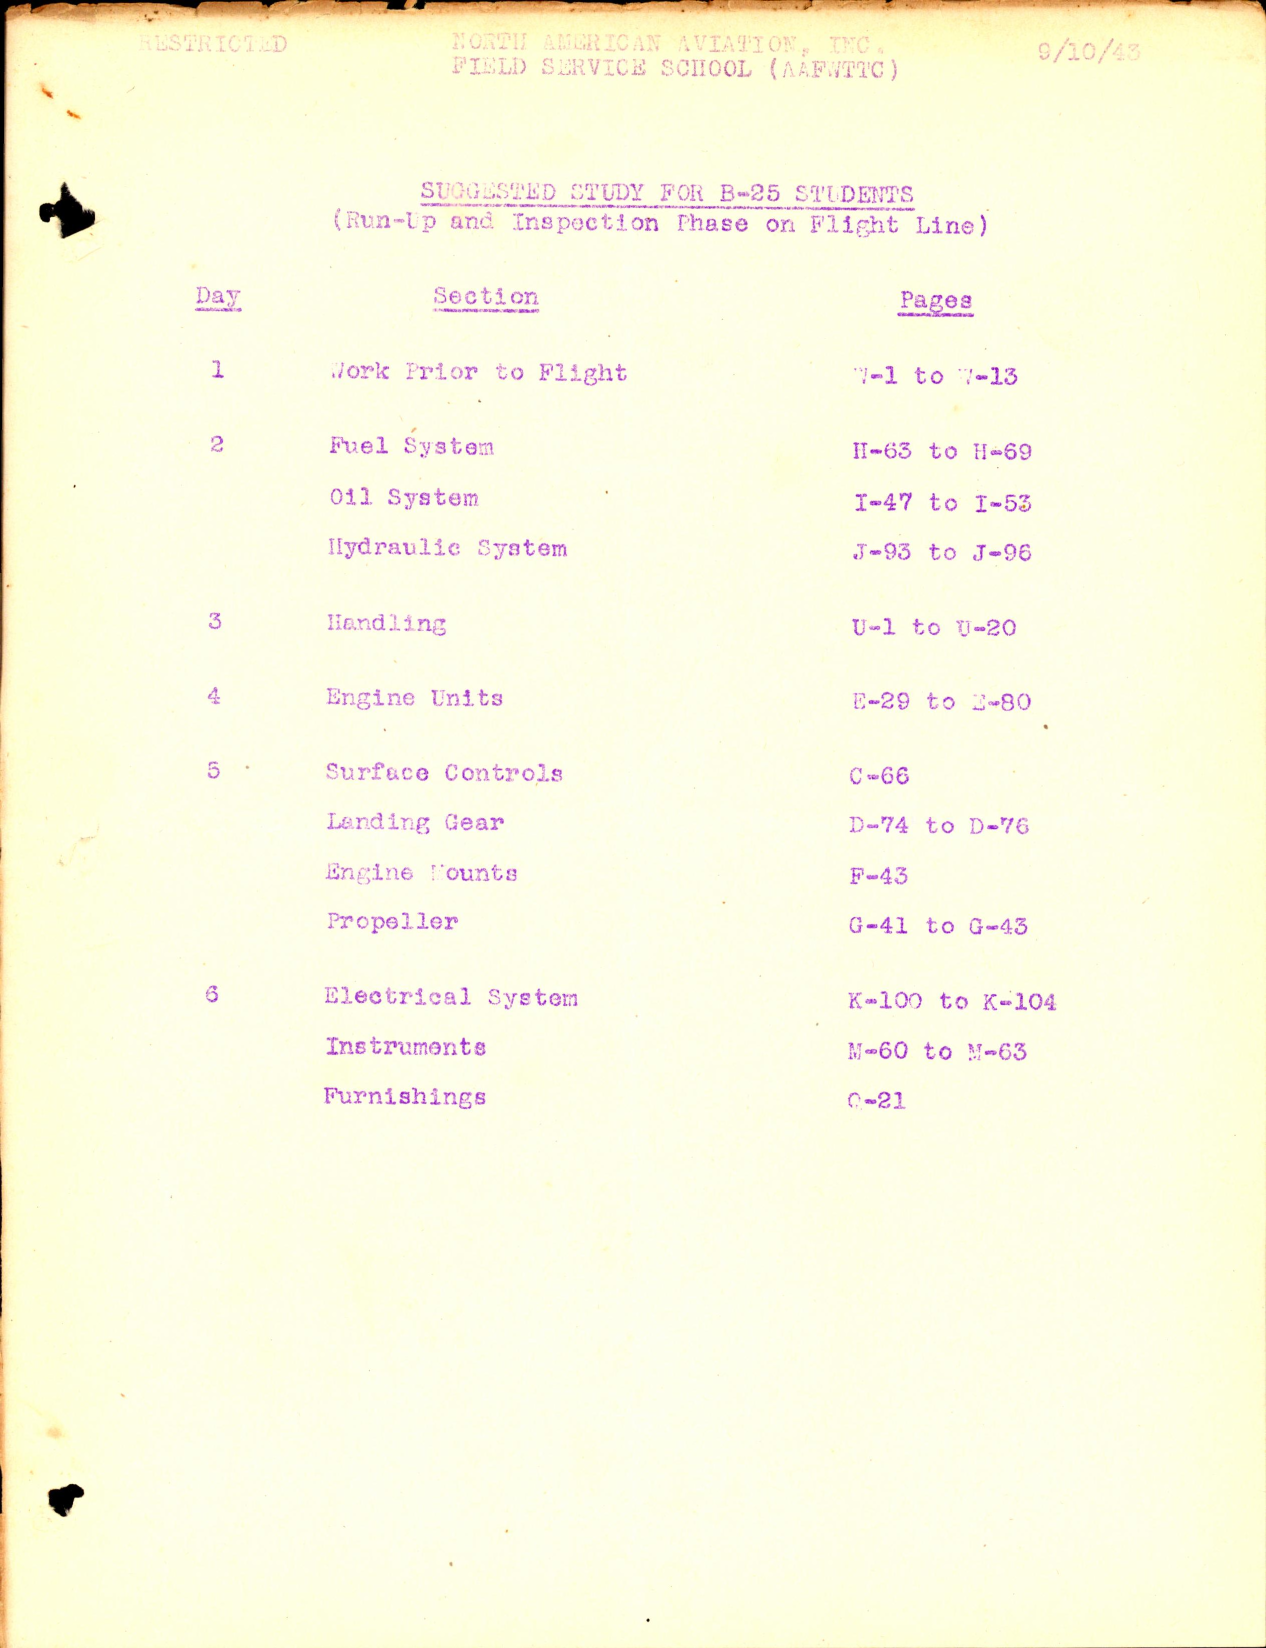 Sample page 1 from AirCorps Library document: Suggested Study for B-25 Students